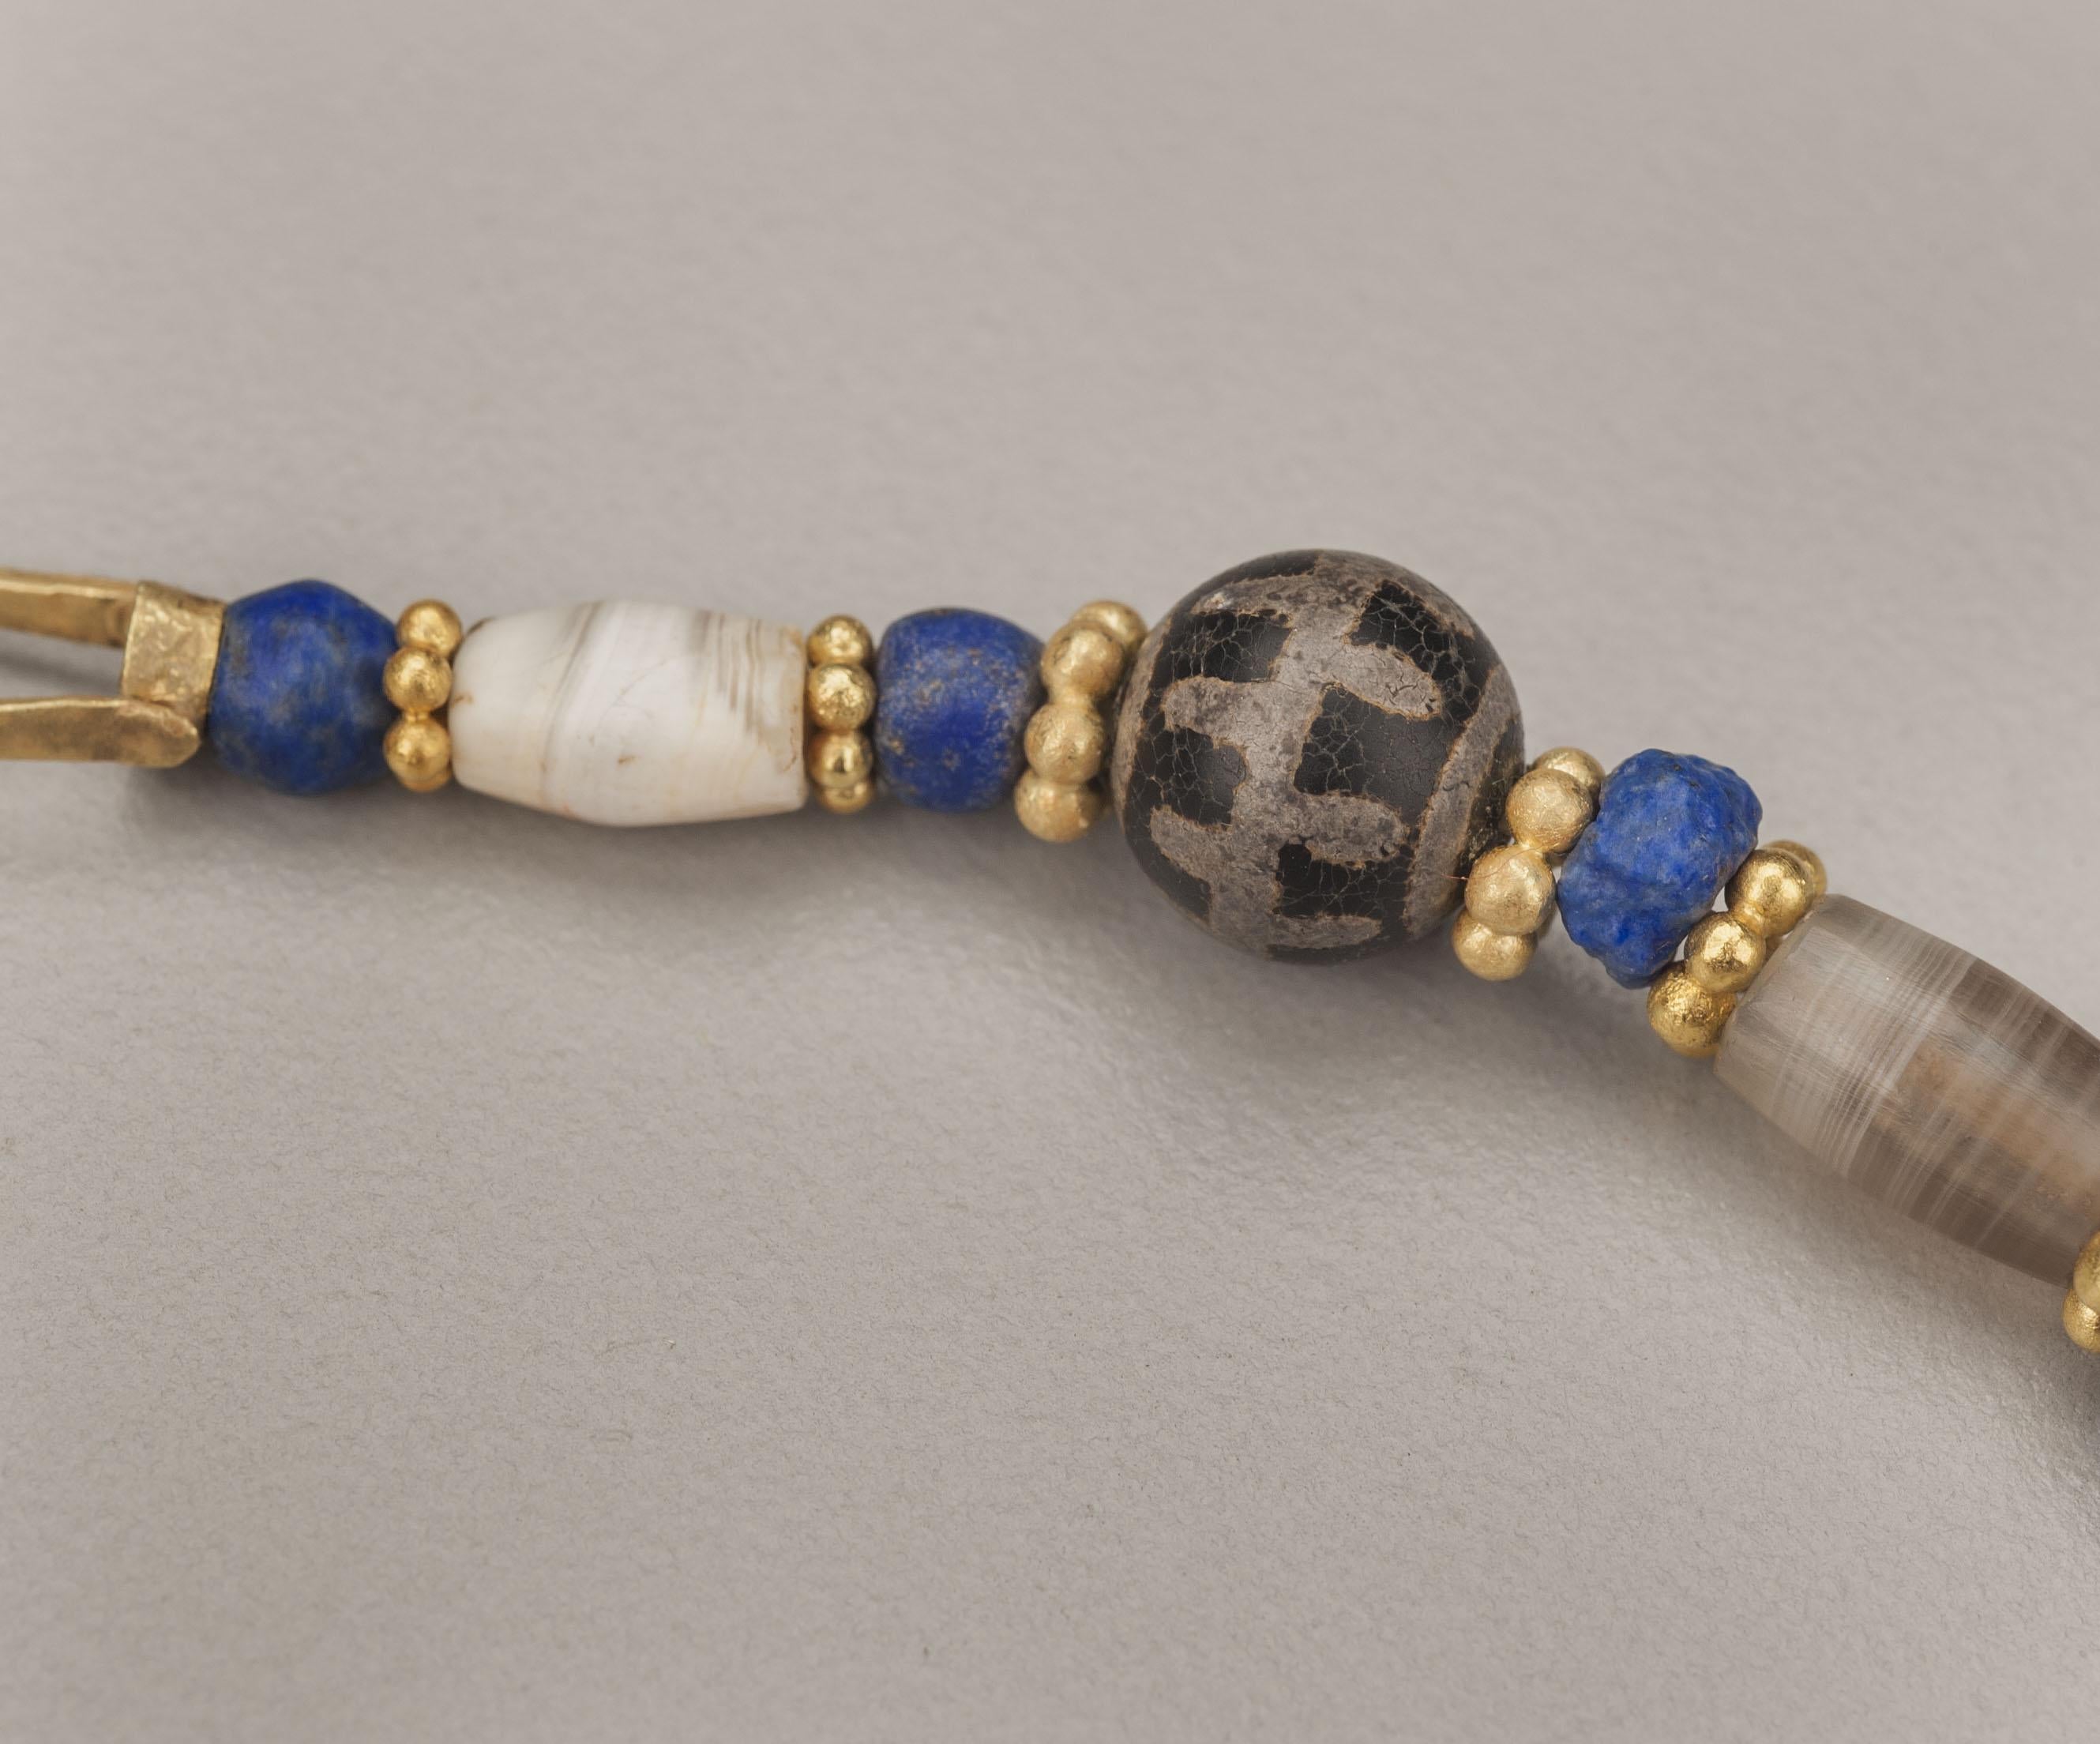 Women's or Men's Ancient Agate Beads with Spherical 'Etched' Agates, Lapis Lazuli, and 20k Gold For Sale